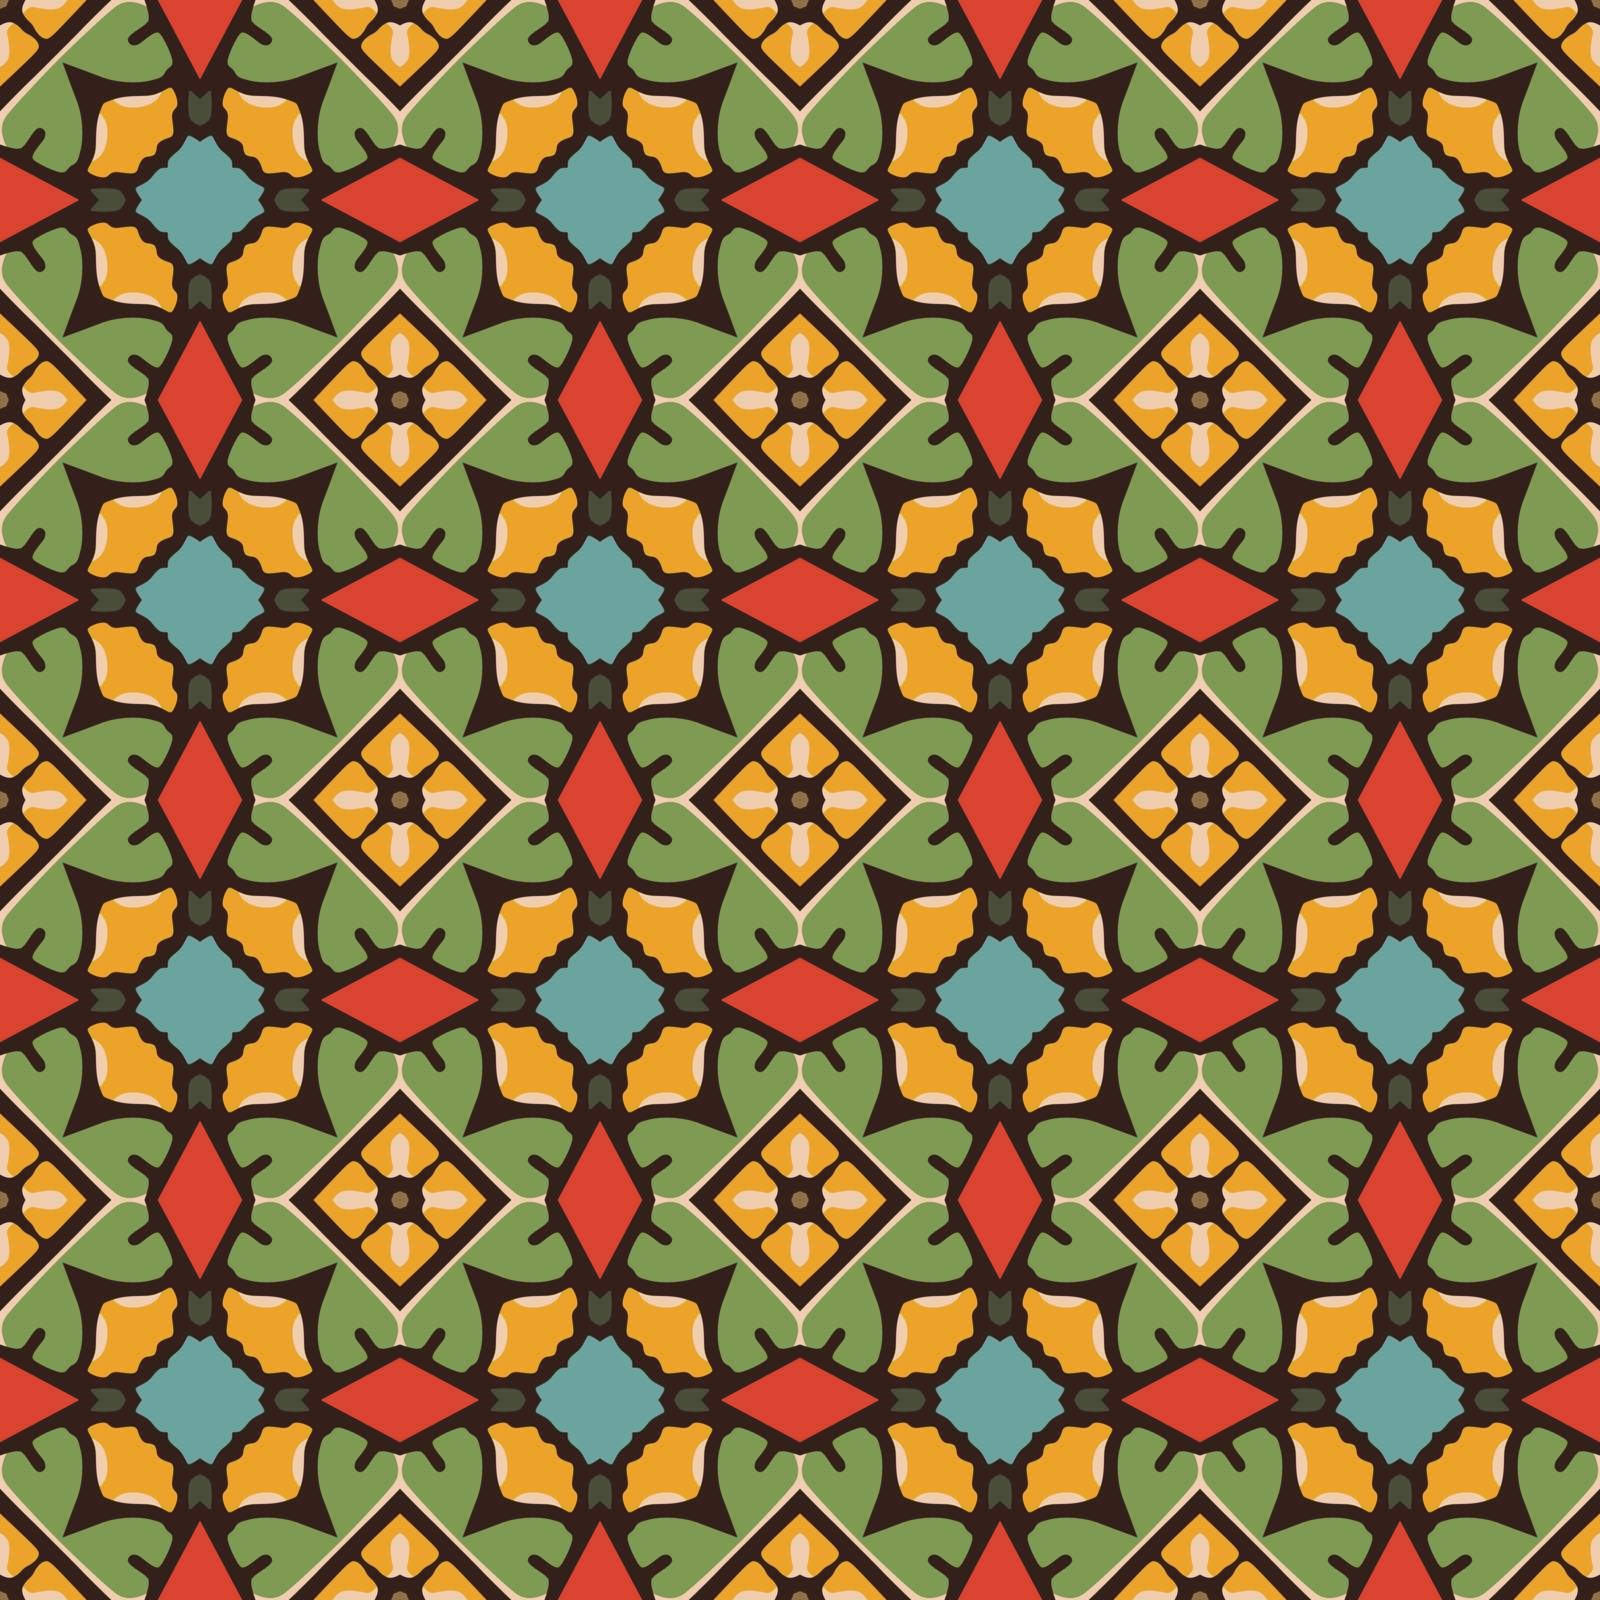 Seamless illustrated pattern made of abstract elements in beige,turquoise, orange, red, green and black